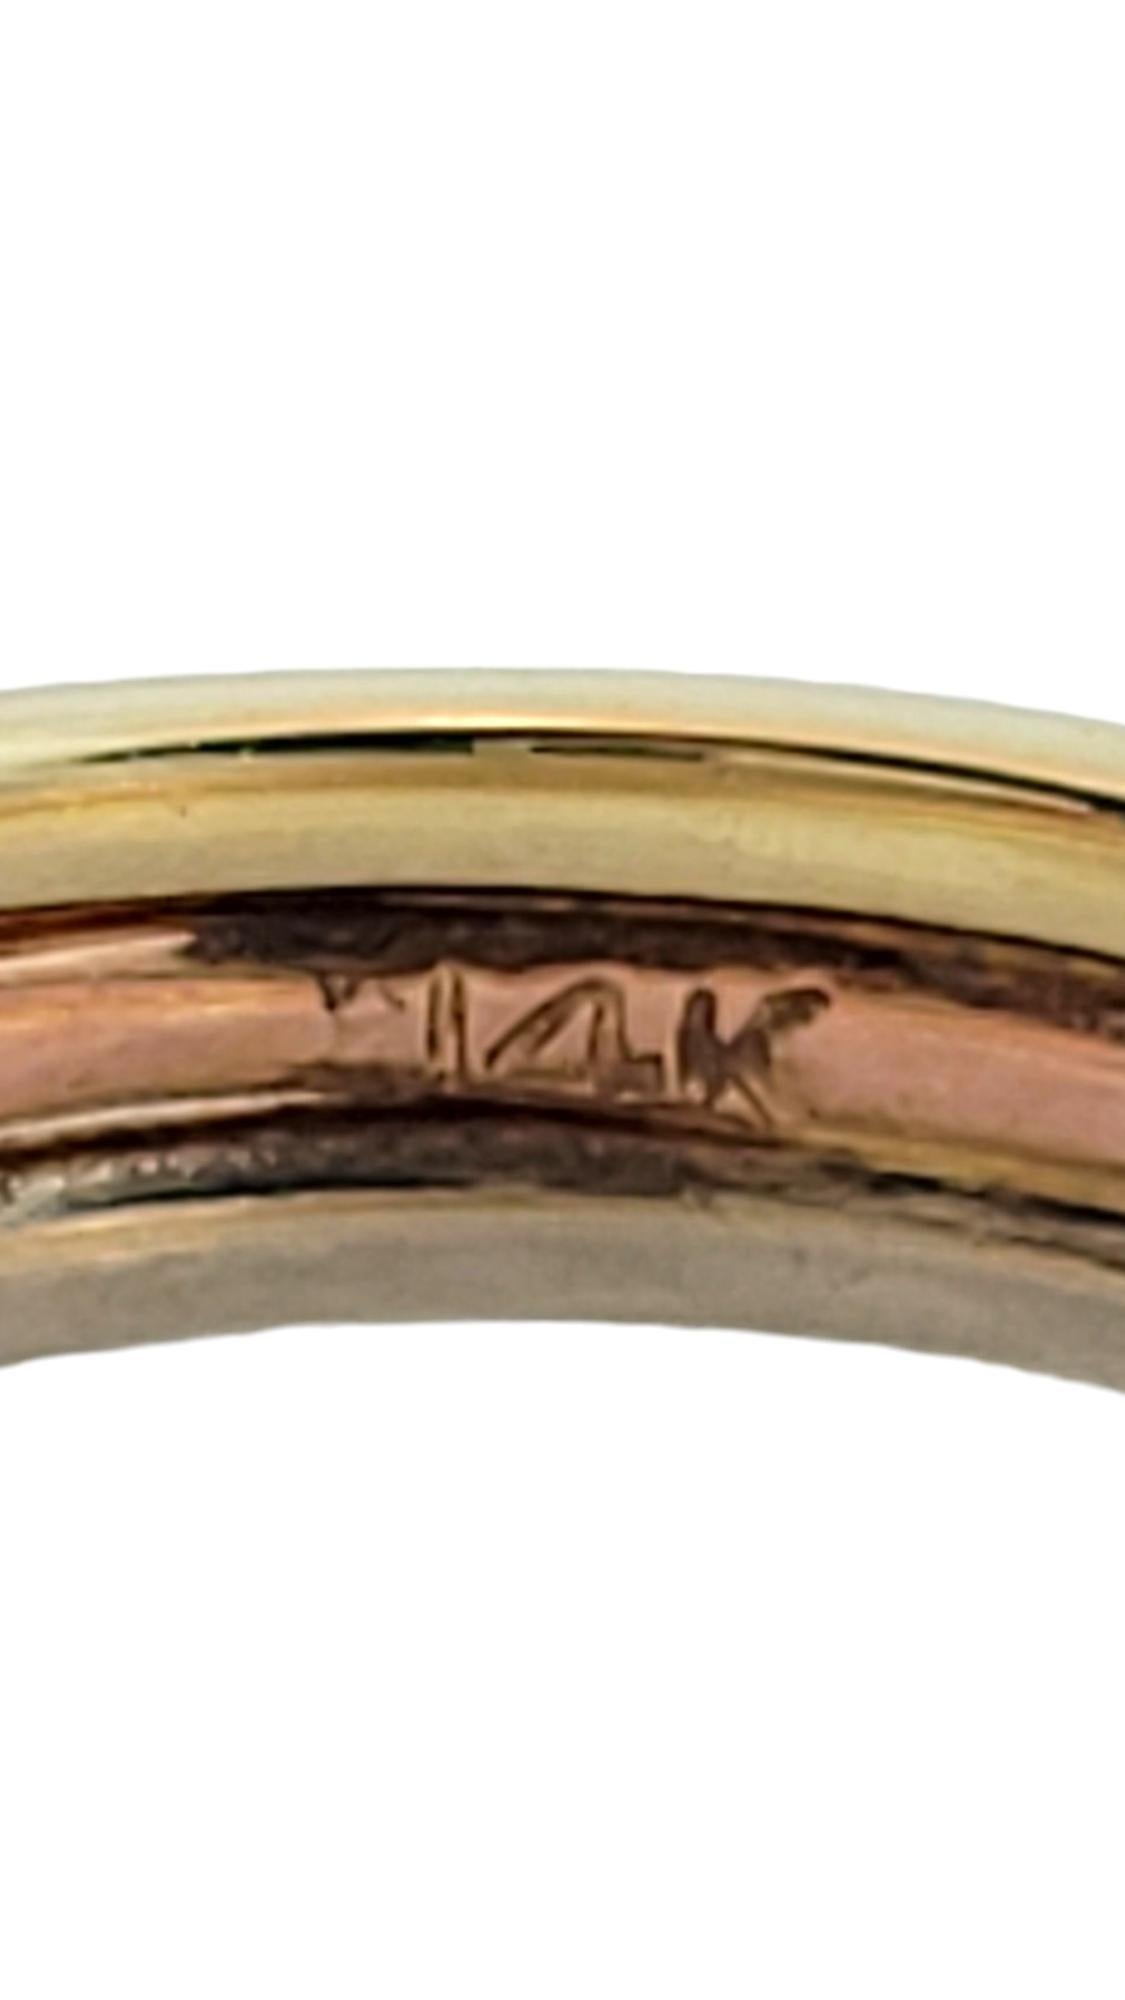 14K Tri Colored Three Band Ring Size 5.25-5.5 #17335 For Sale 1